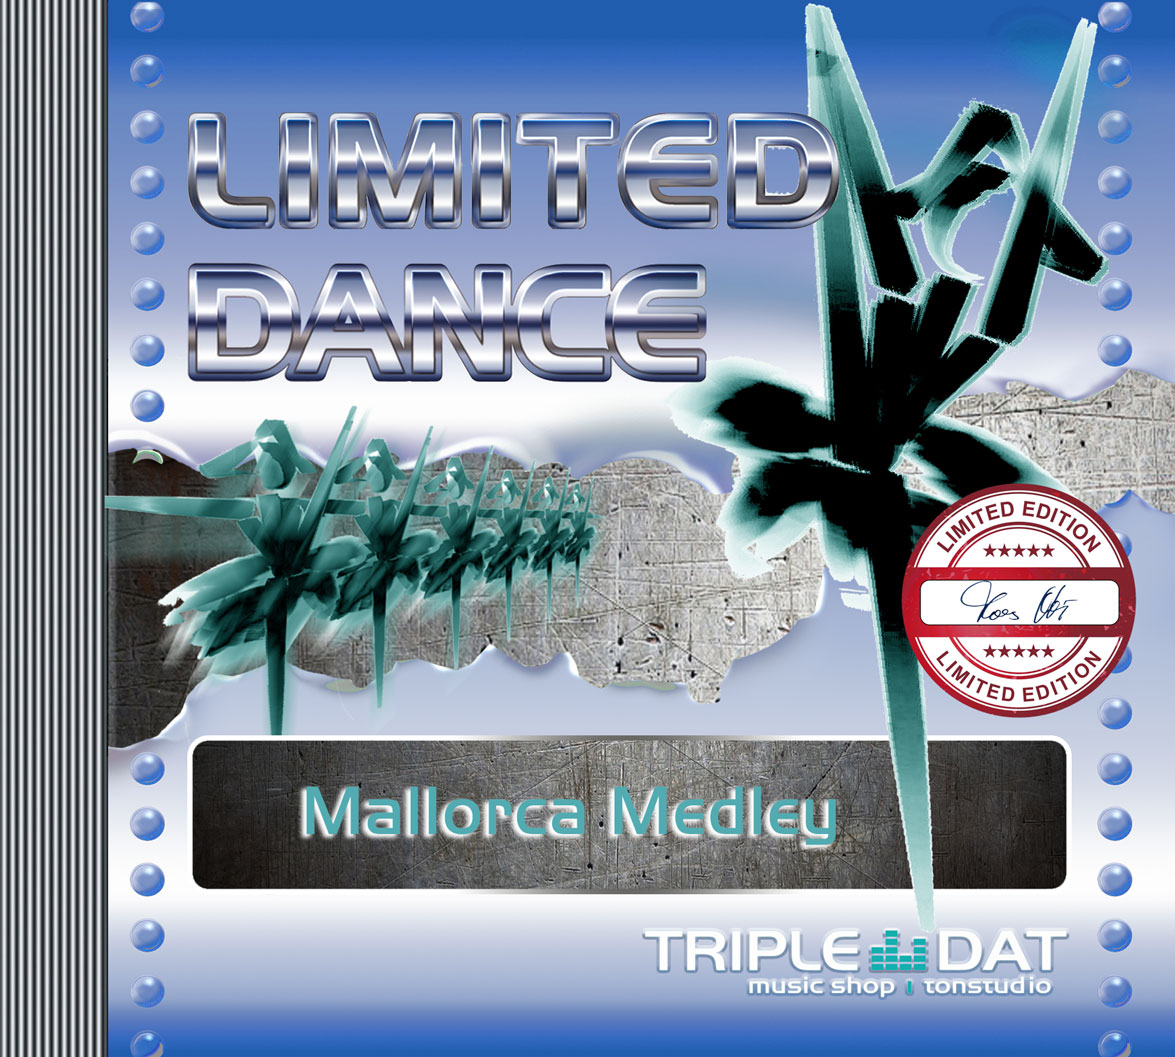 Limited Dance - Mallorca Medley - Download